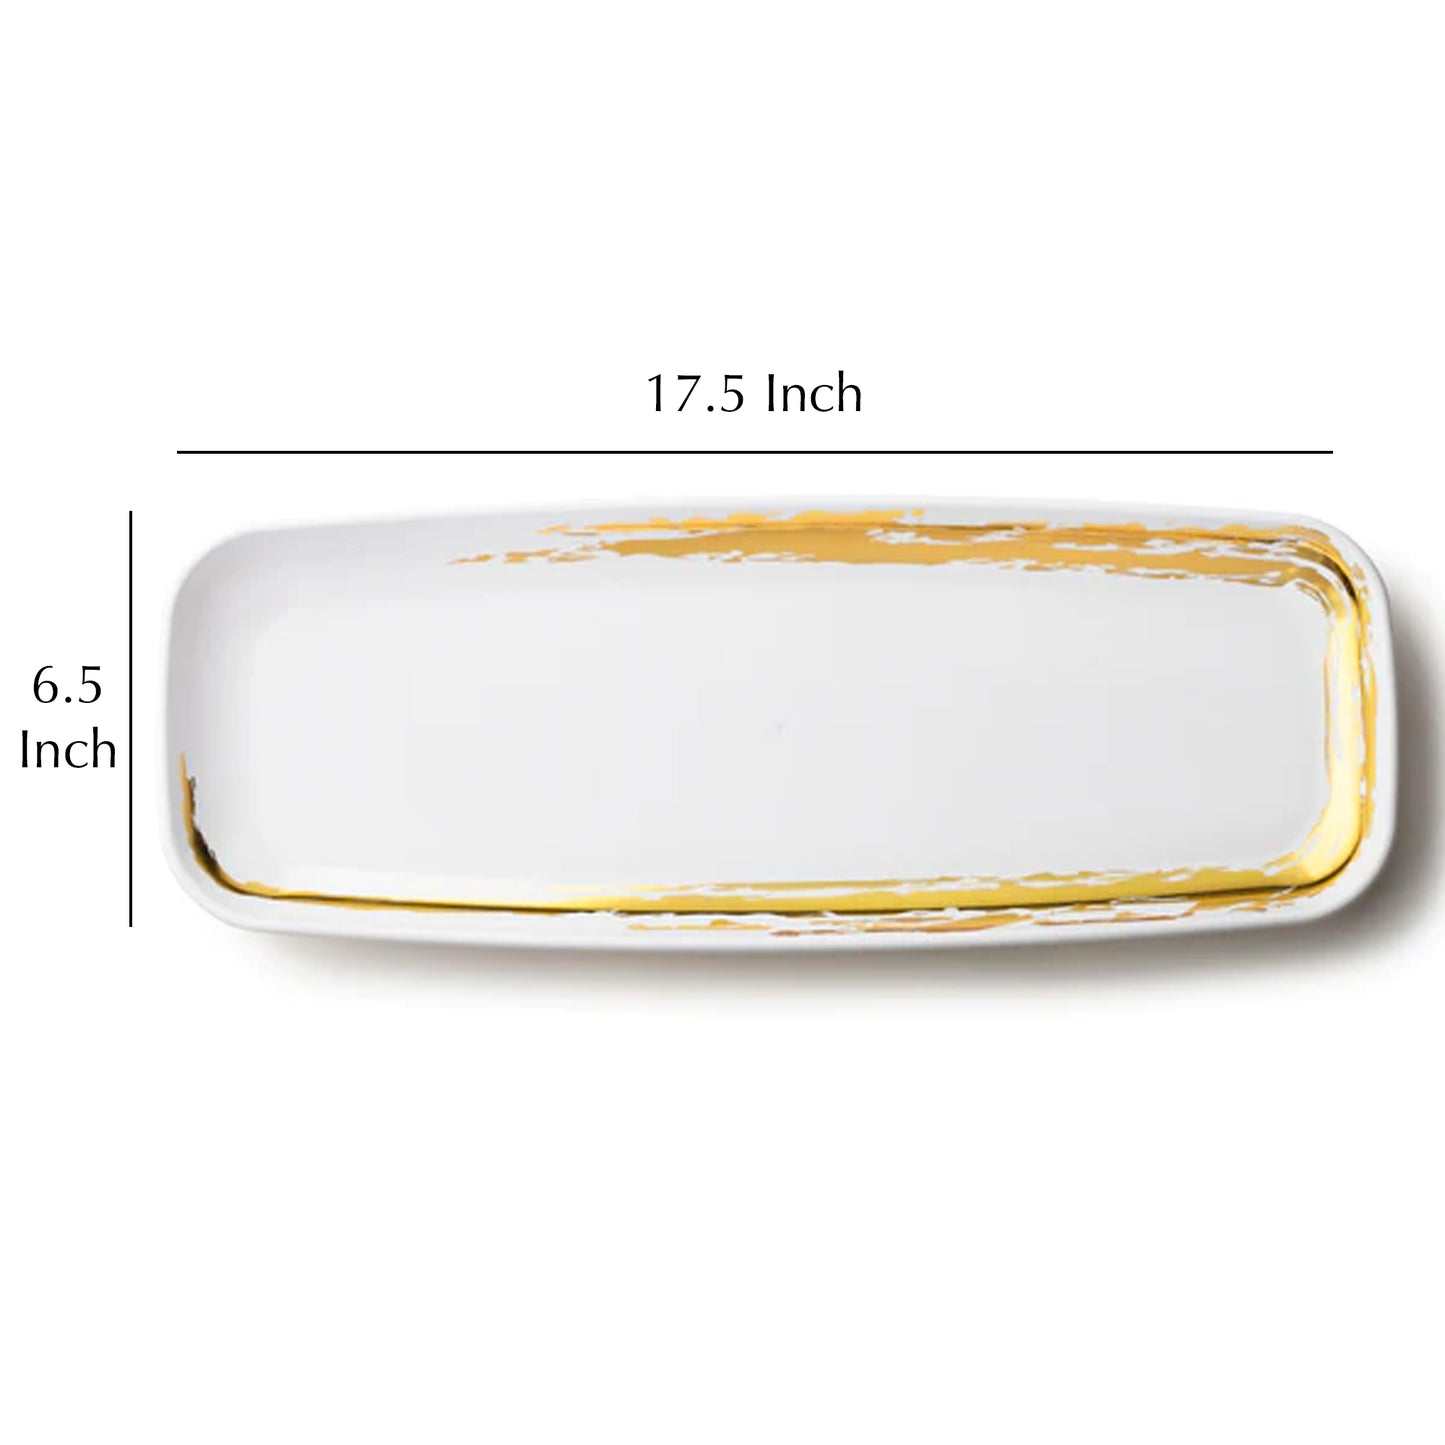 Whisk Collection White Oval Serving Tray Gold Accent 6.5" x 17.5"  Decorline   